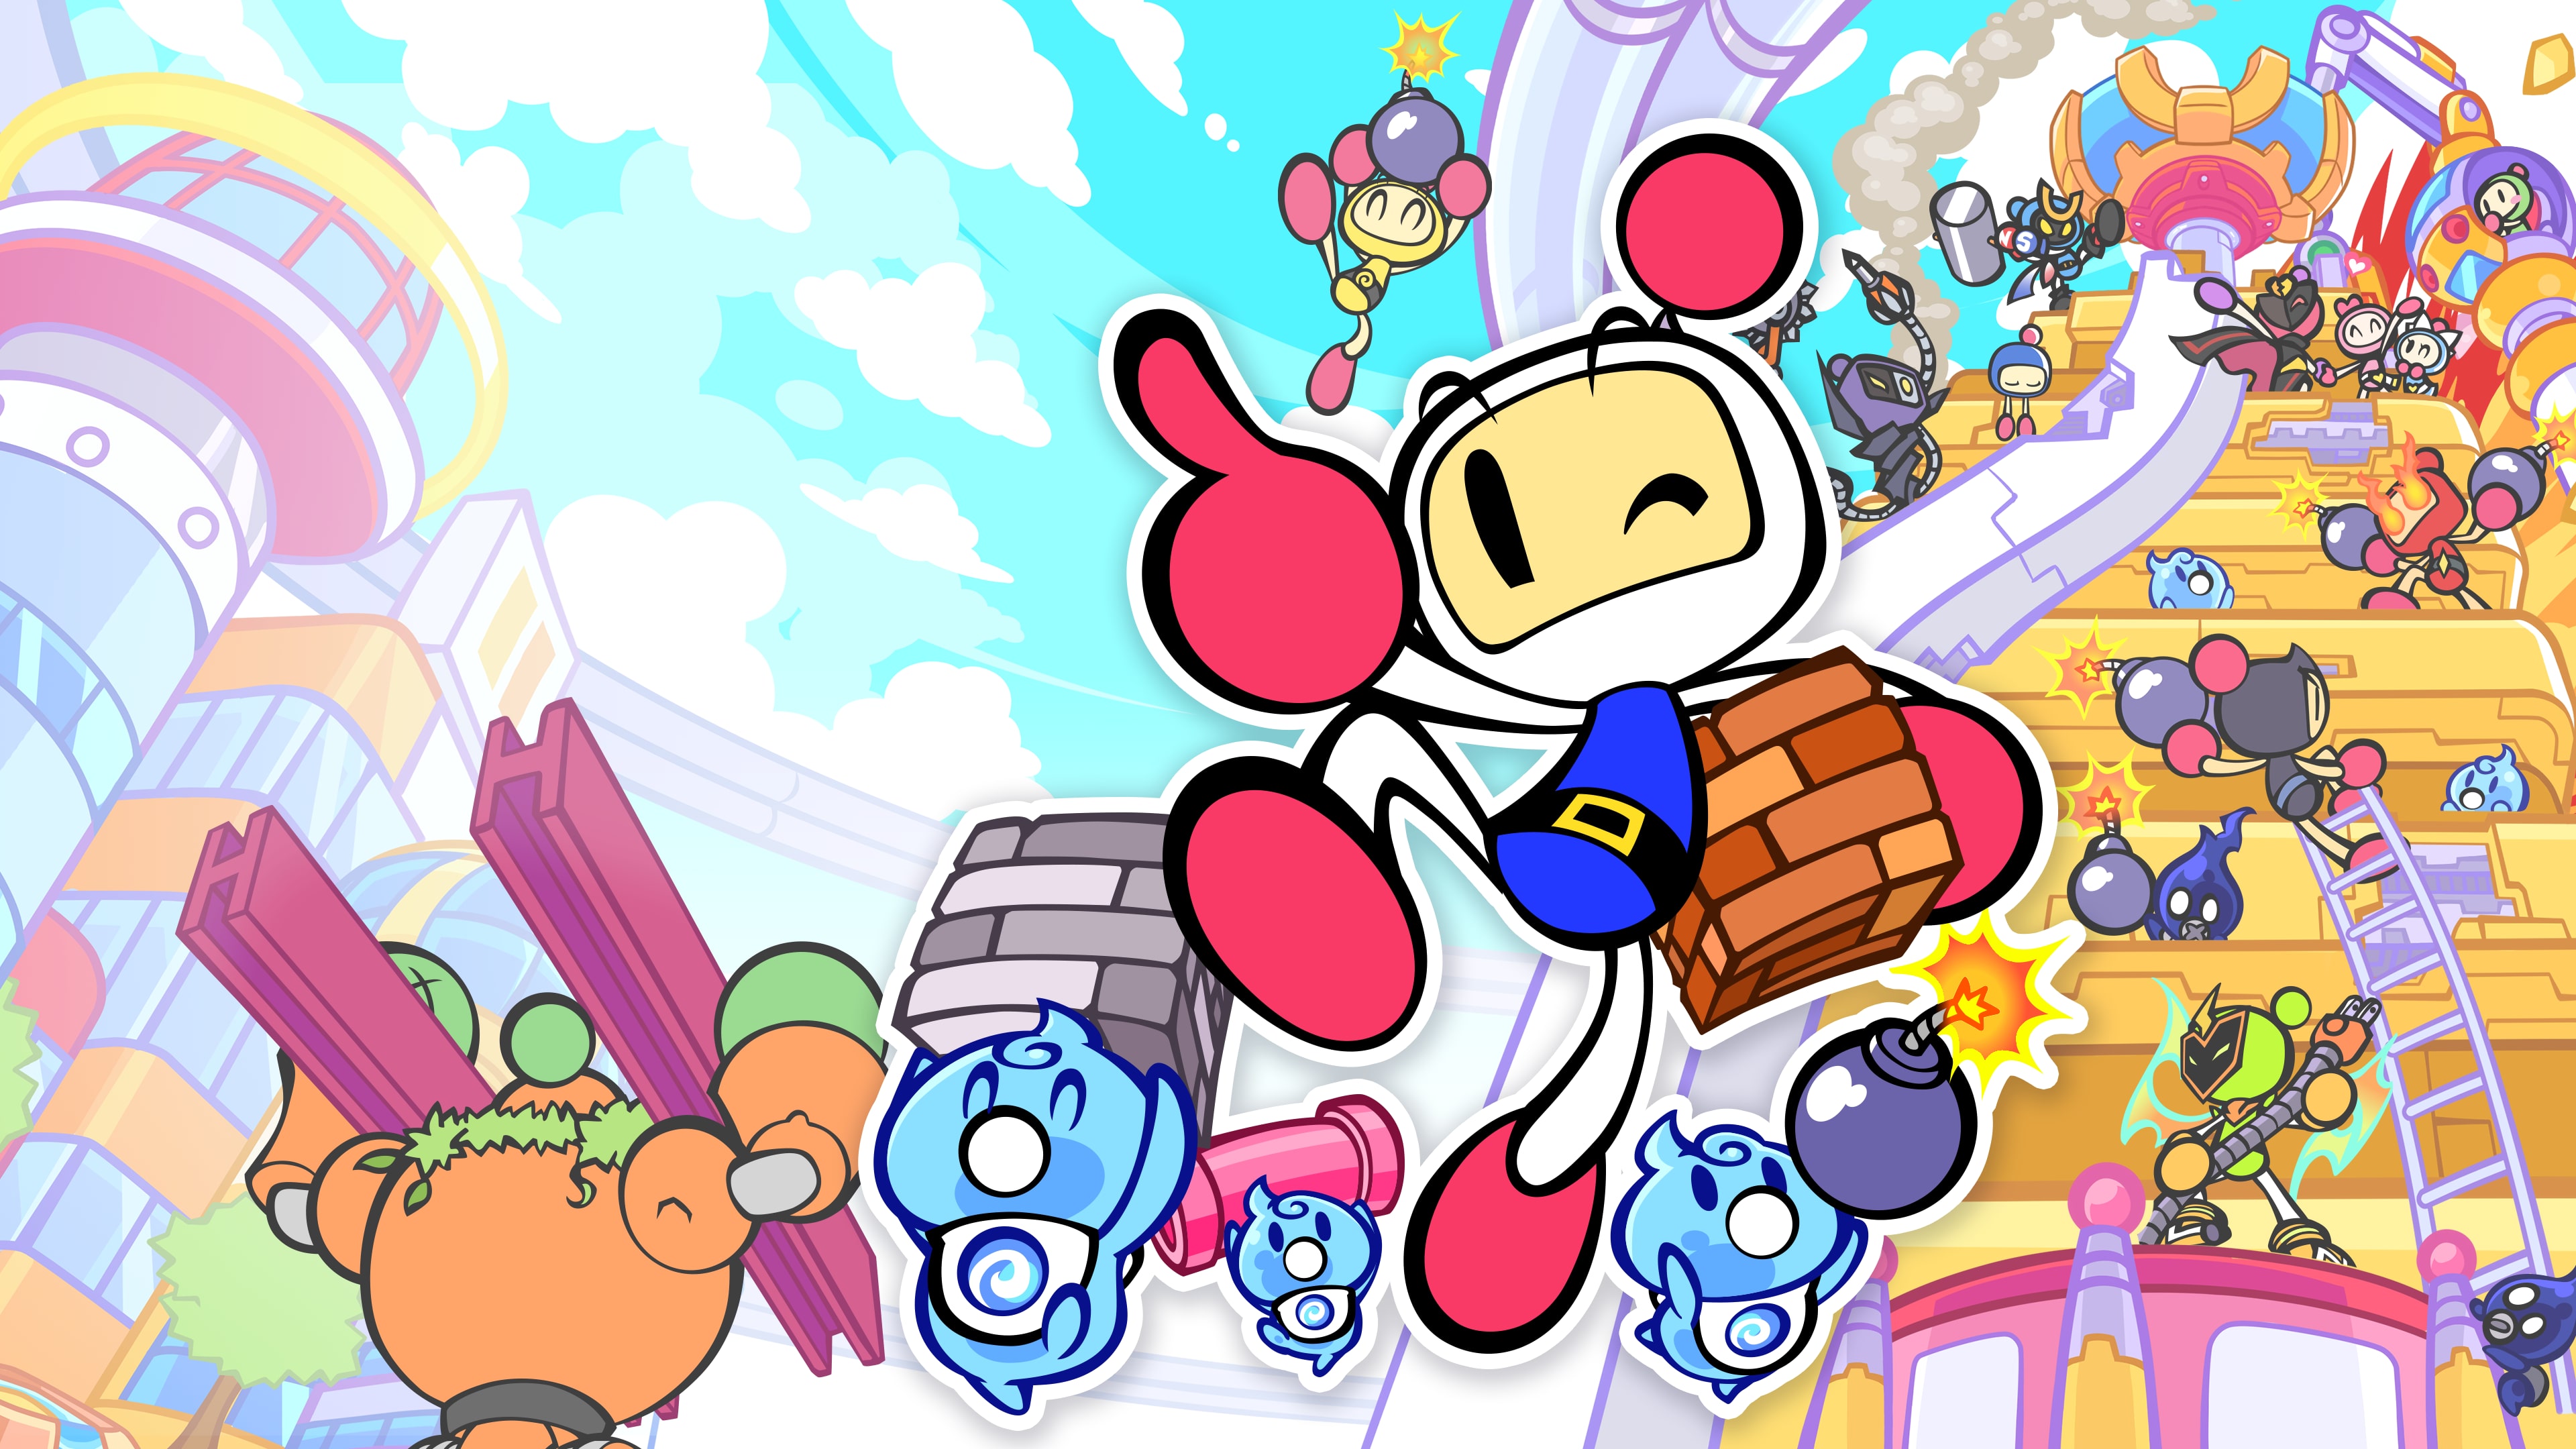 SUPER BOMBERMAN R 2 PS4 & PS5 (Simplified Chinese, English, Korean, Japanese, Traditional Chinese)